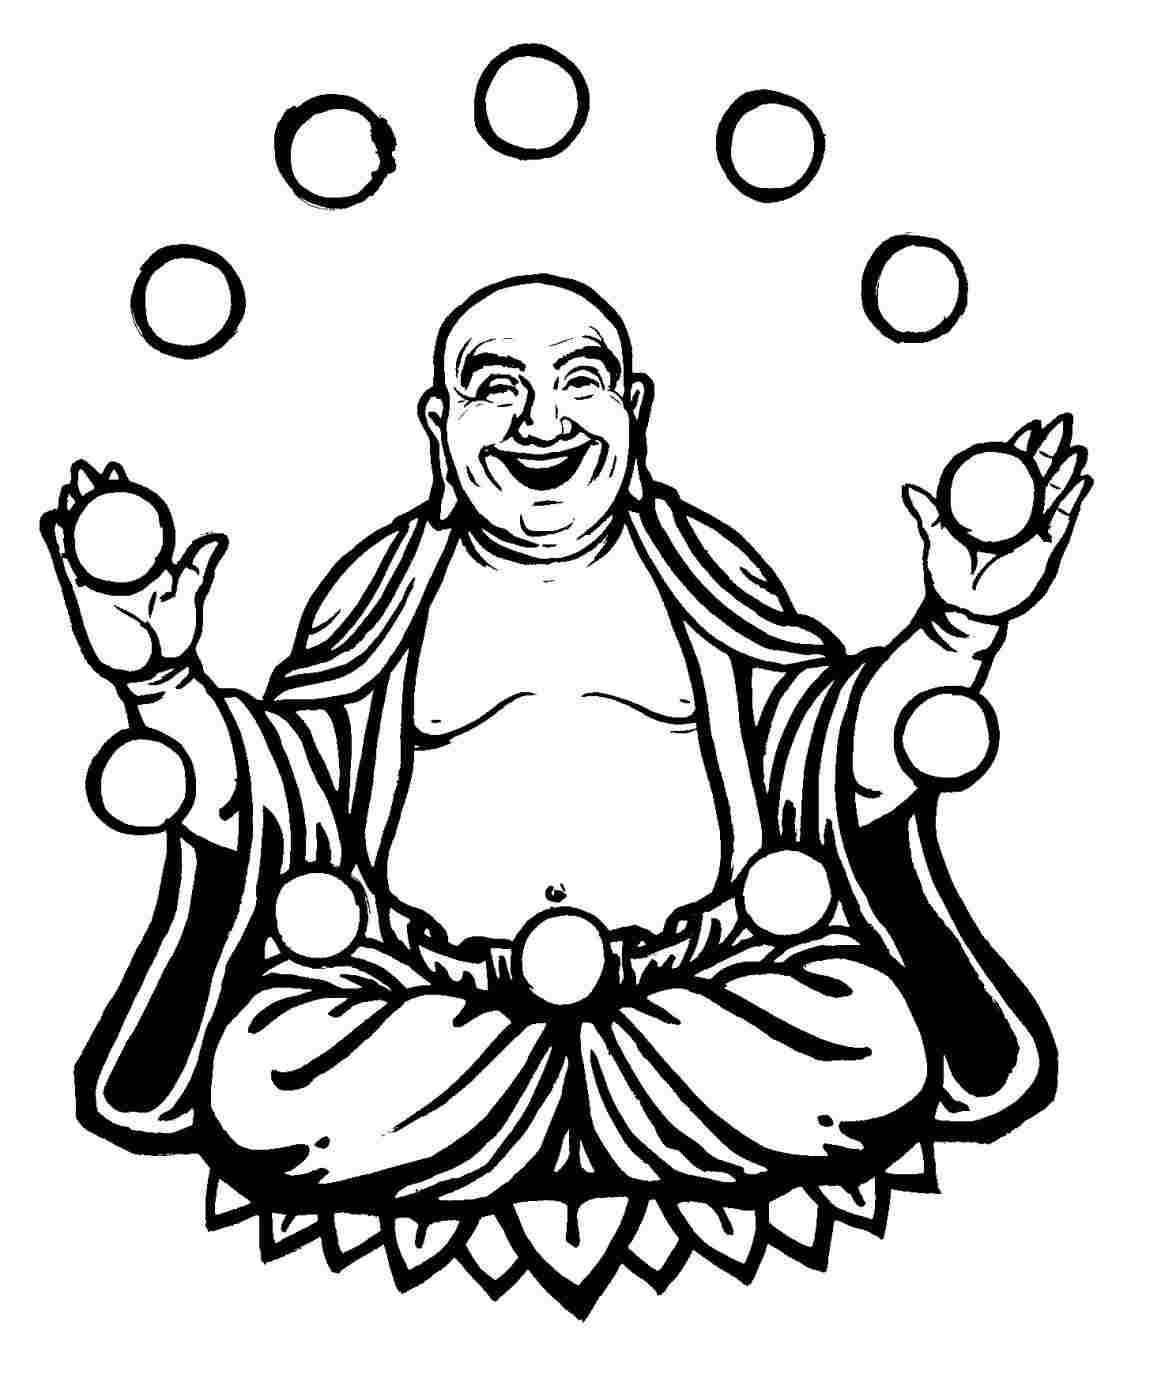 Buddha clipart easy. Collection drawings of free